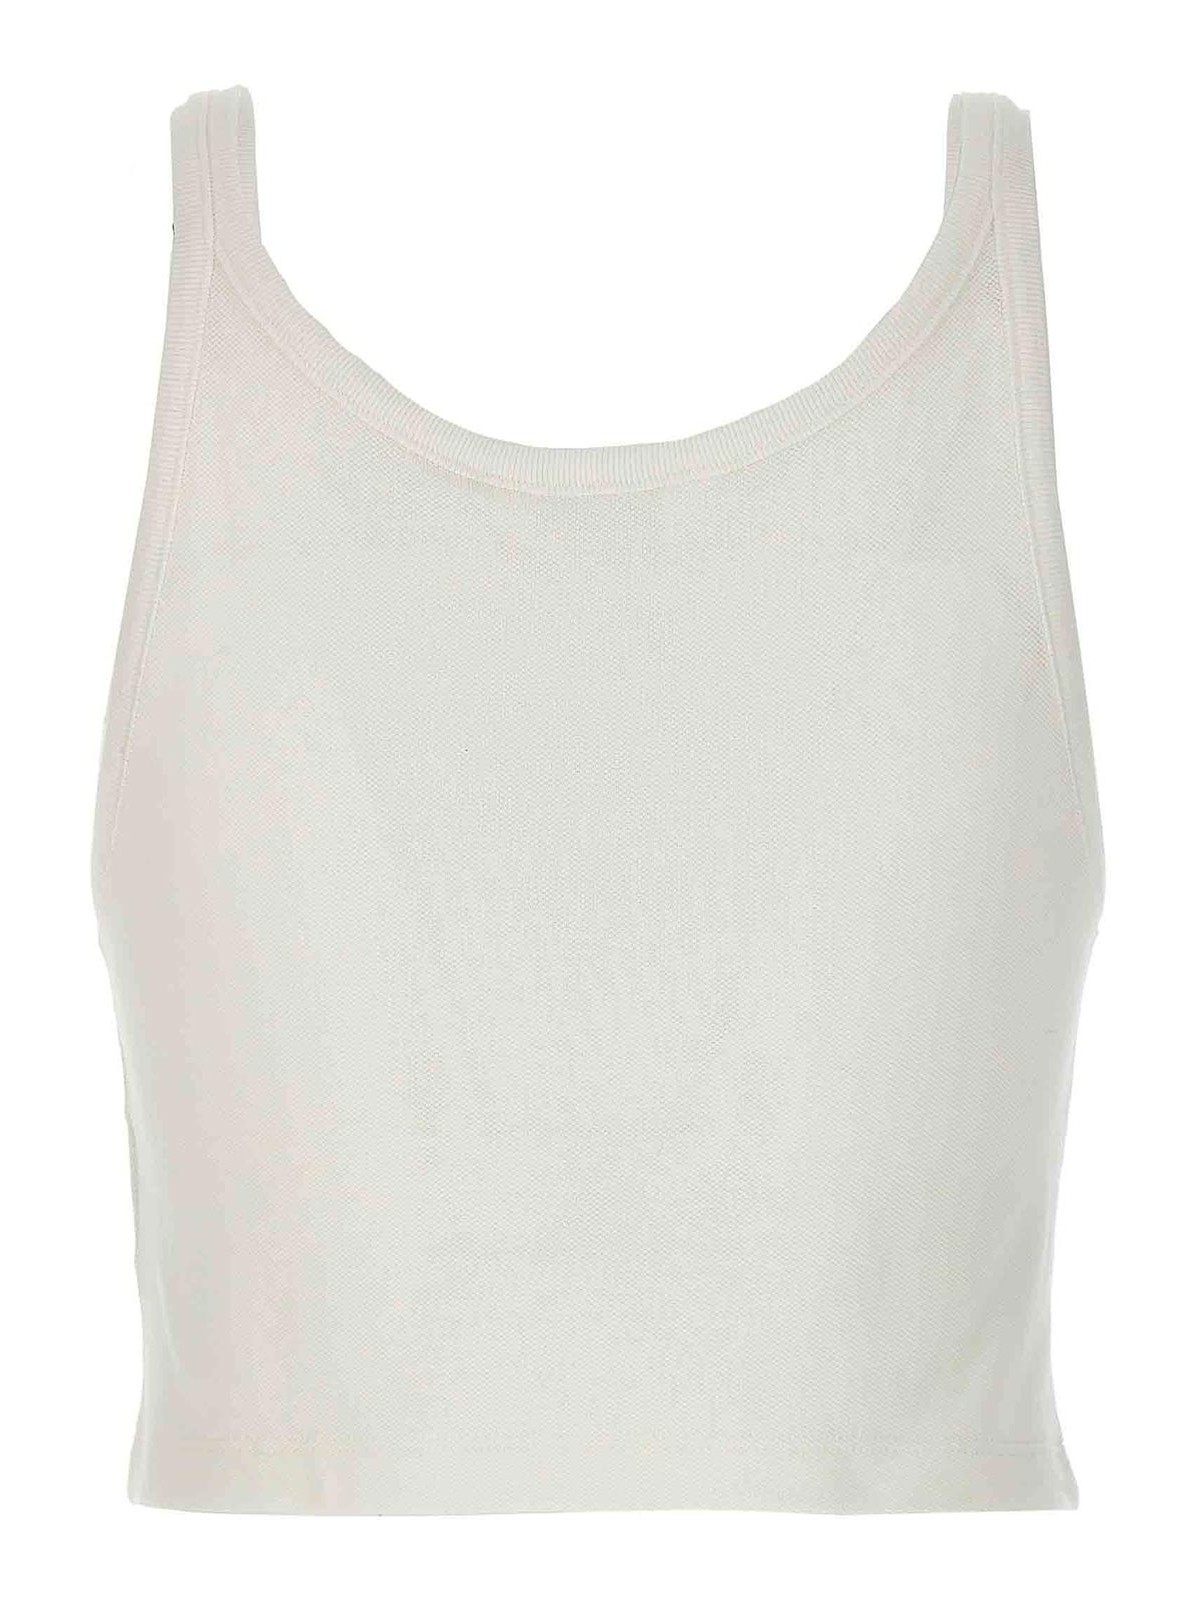 Shop Palm Angels Top - Blanco In White